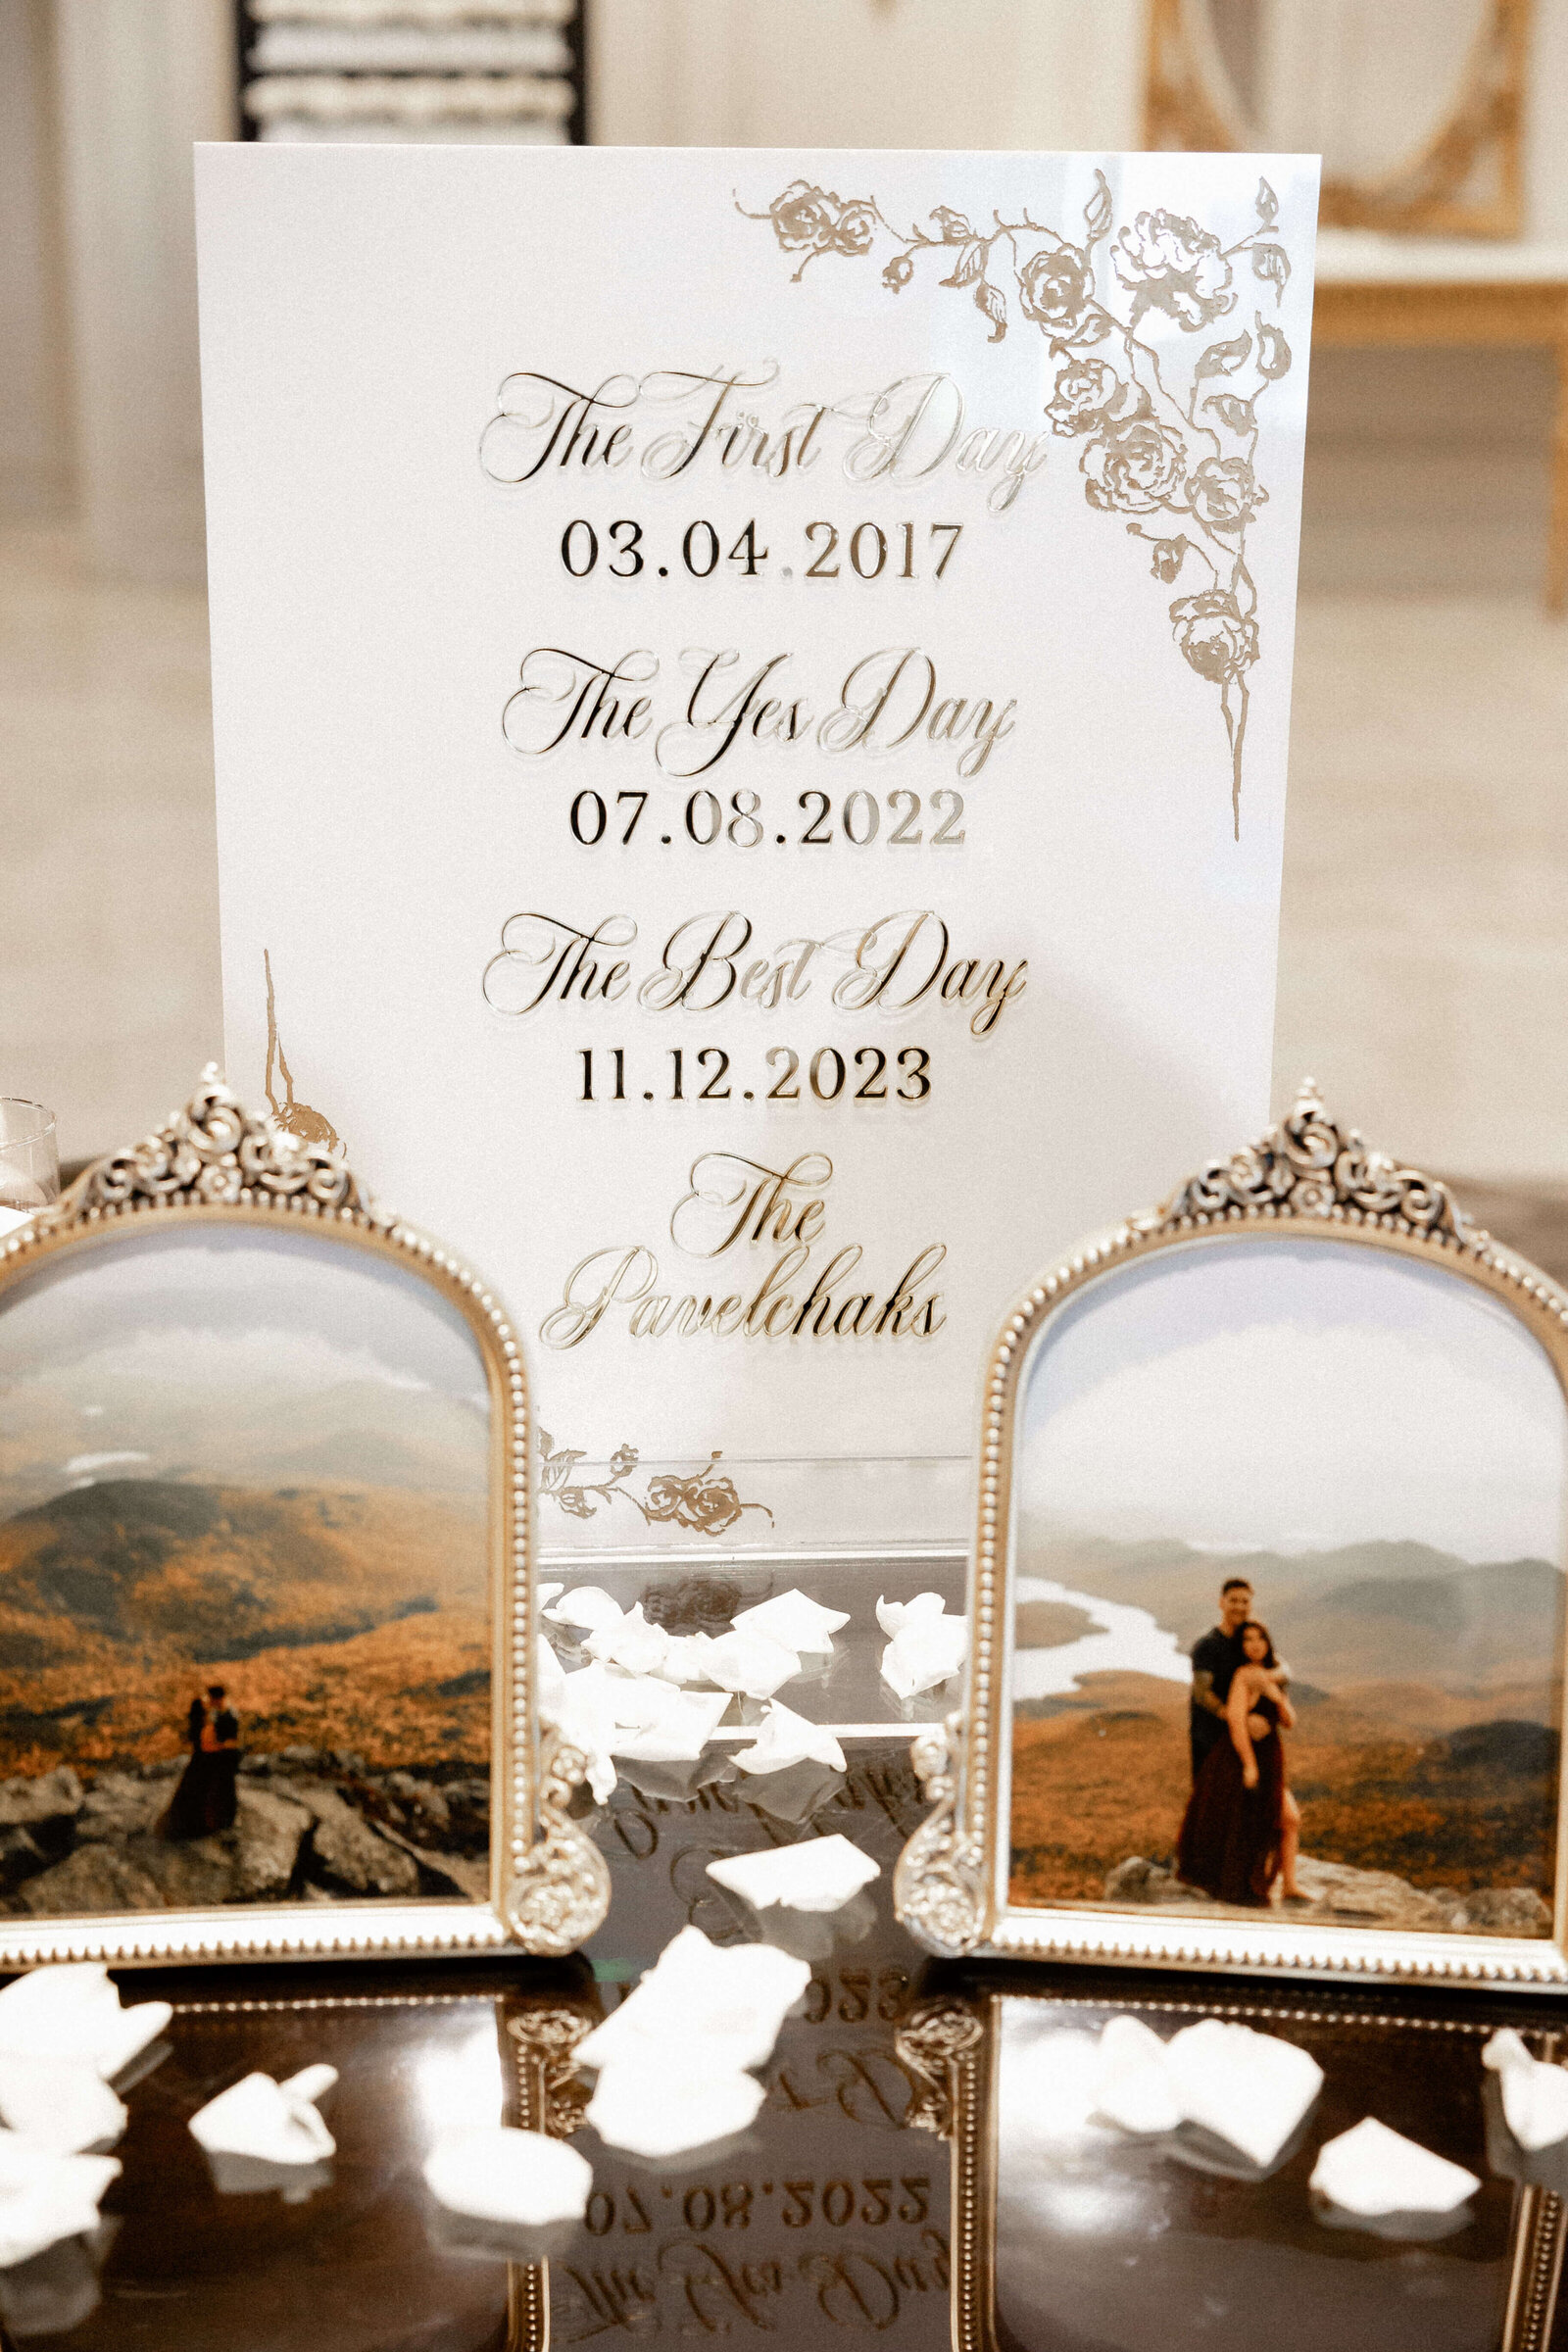 SGH Creative Luxury Wedding Calligraphy & Design in New York & New Jersey - Christy and Ryan Wedding by Charming Images (7)